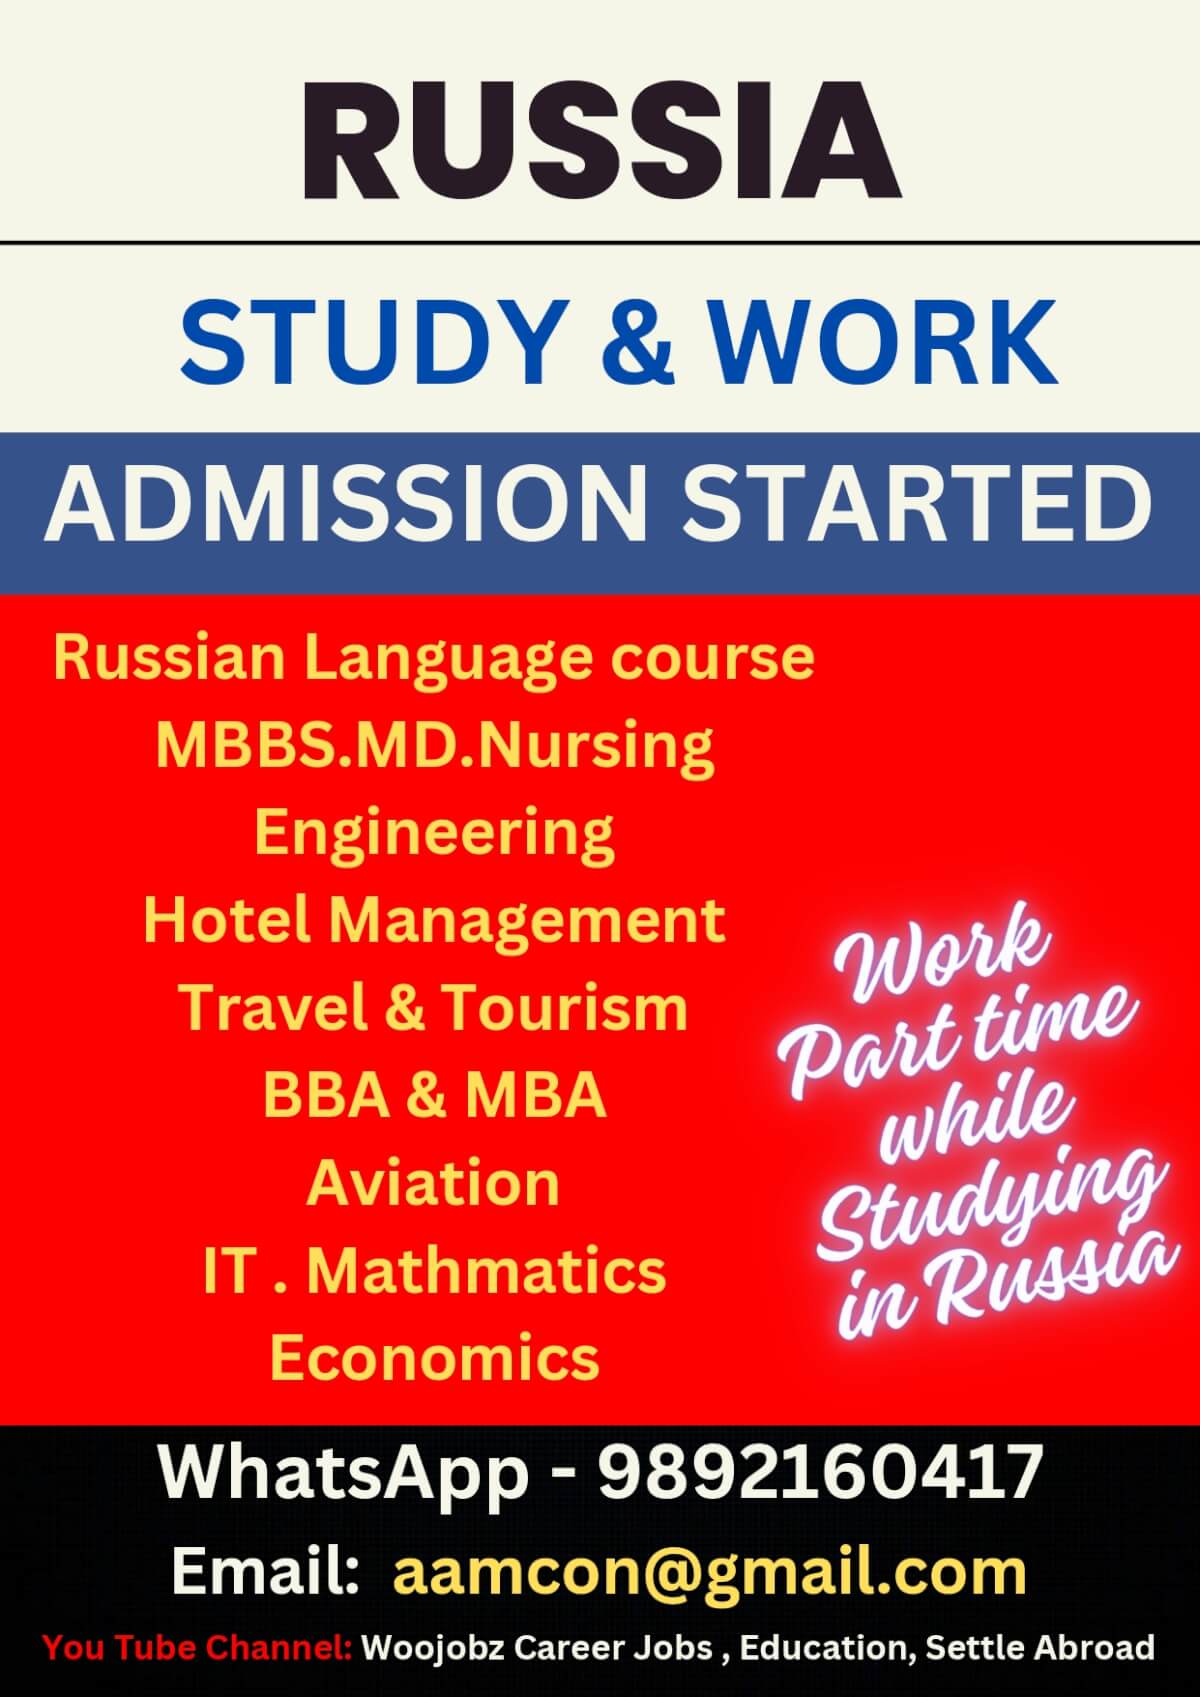 Russia - Work and Study